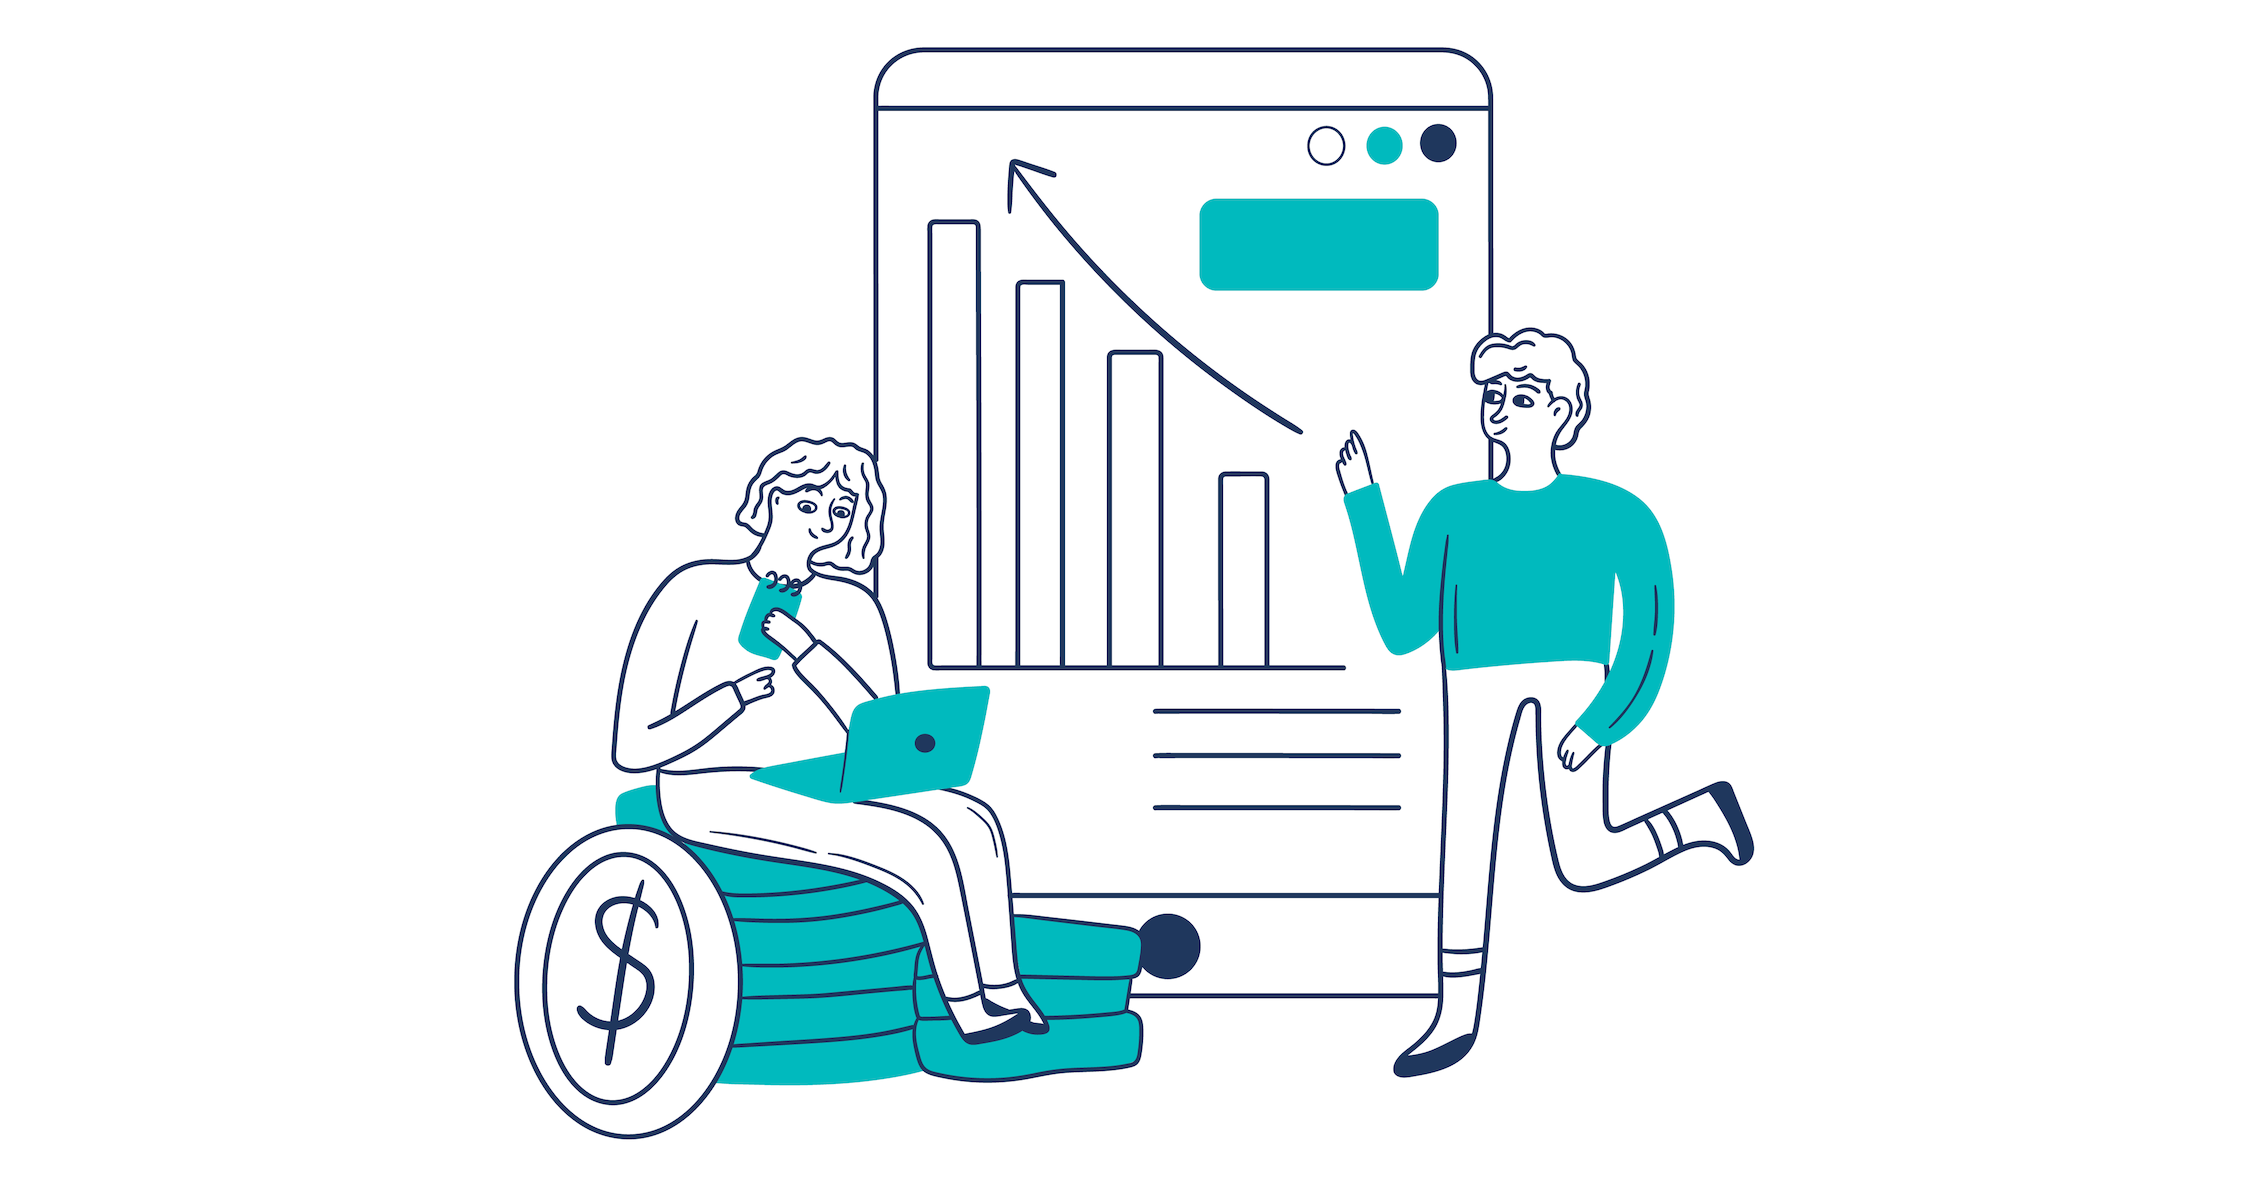 The illustration shows a man and a women looking at financial analytics on a screen